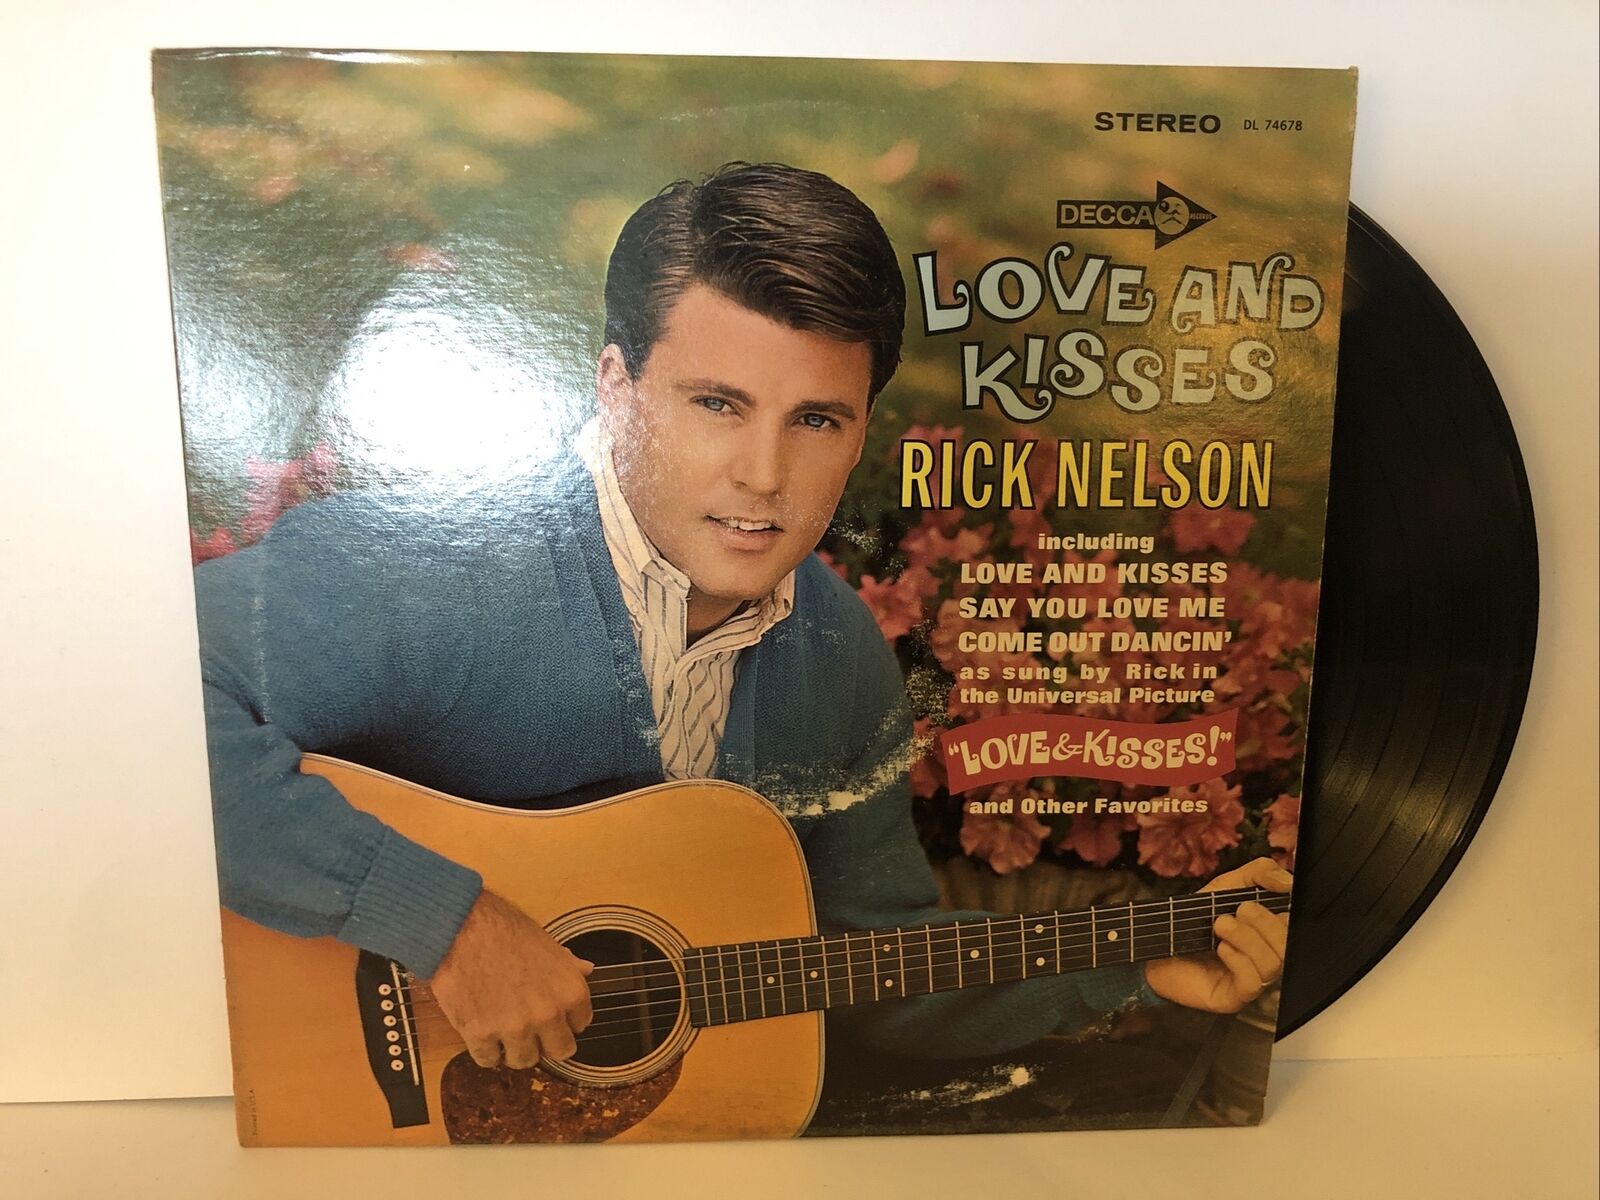 VG Rick Nelson Love And Kisses DL 74678 Decca LP 12in Vinyl Record